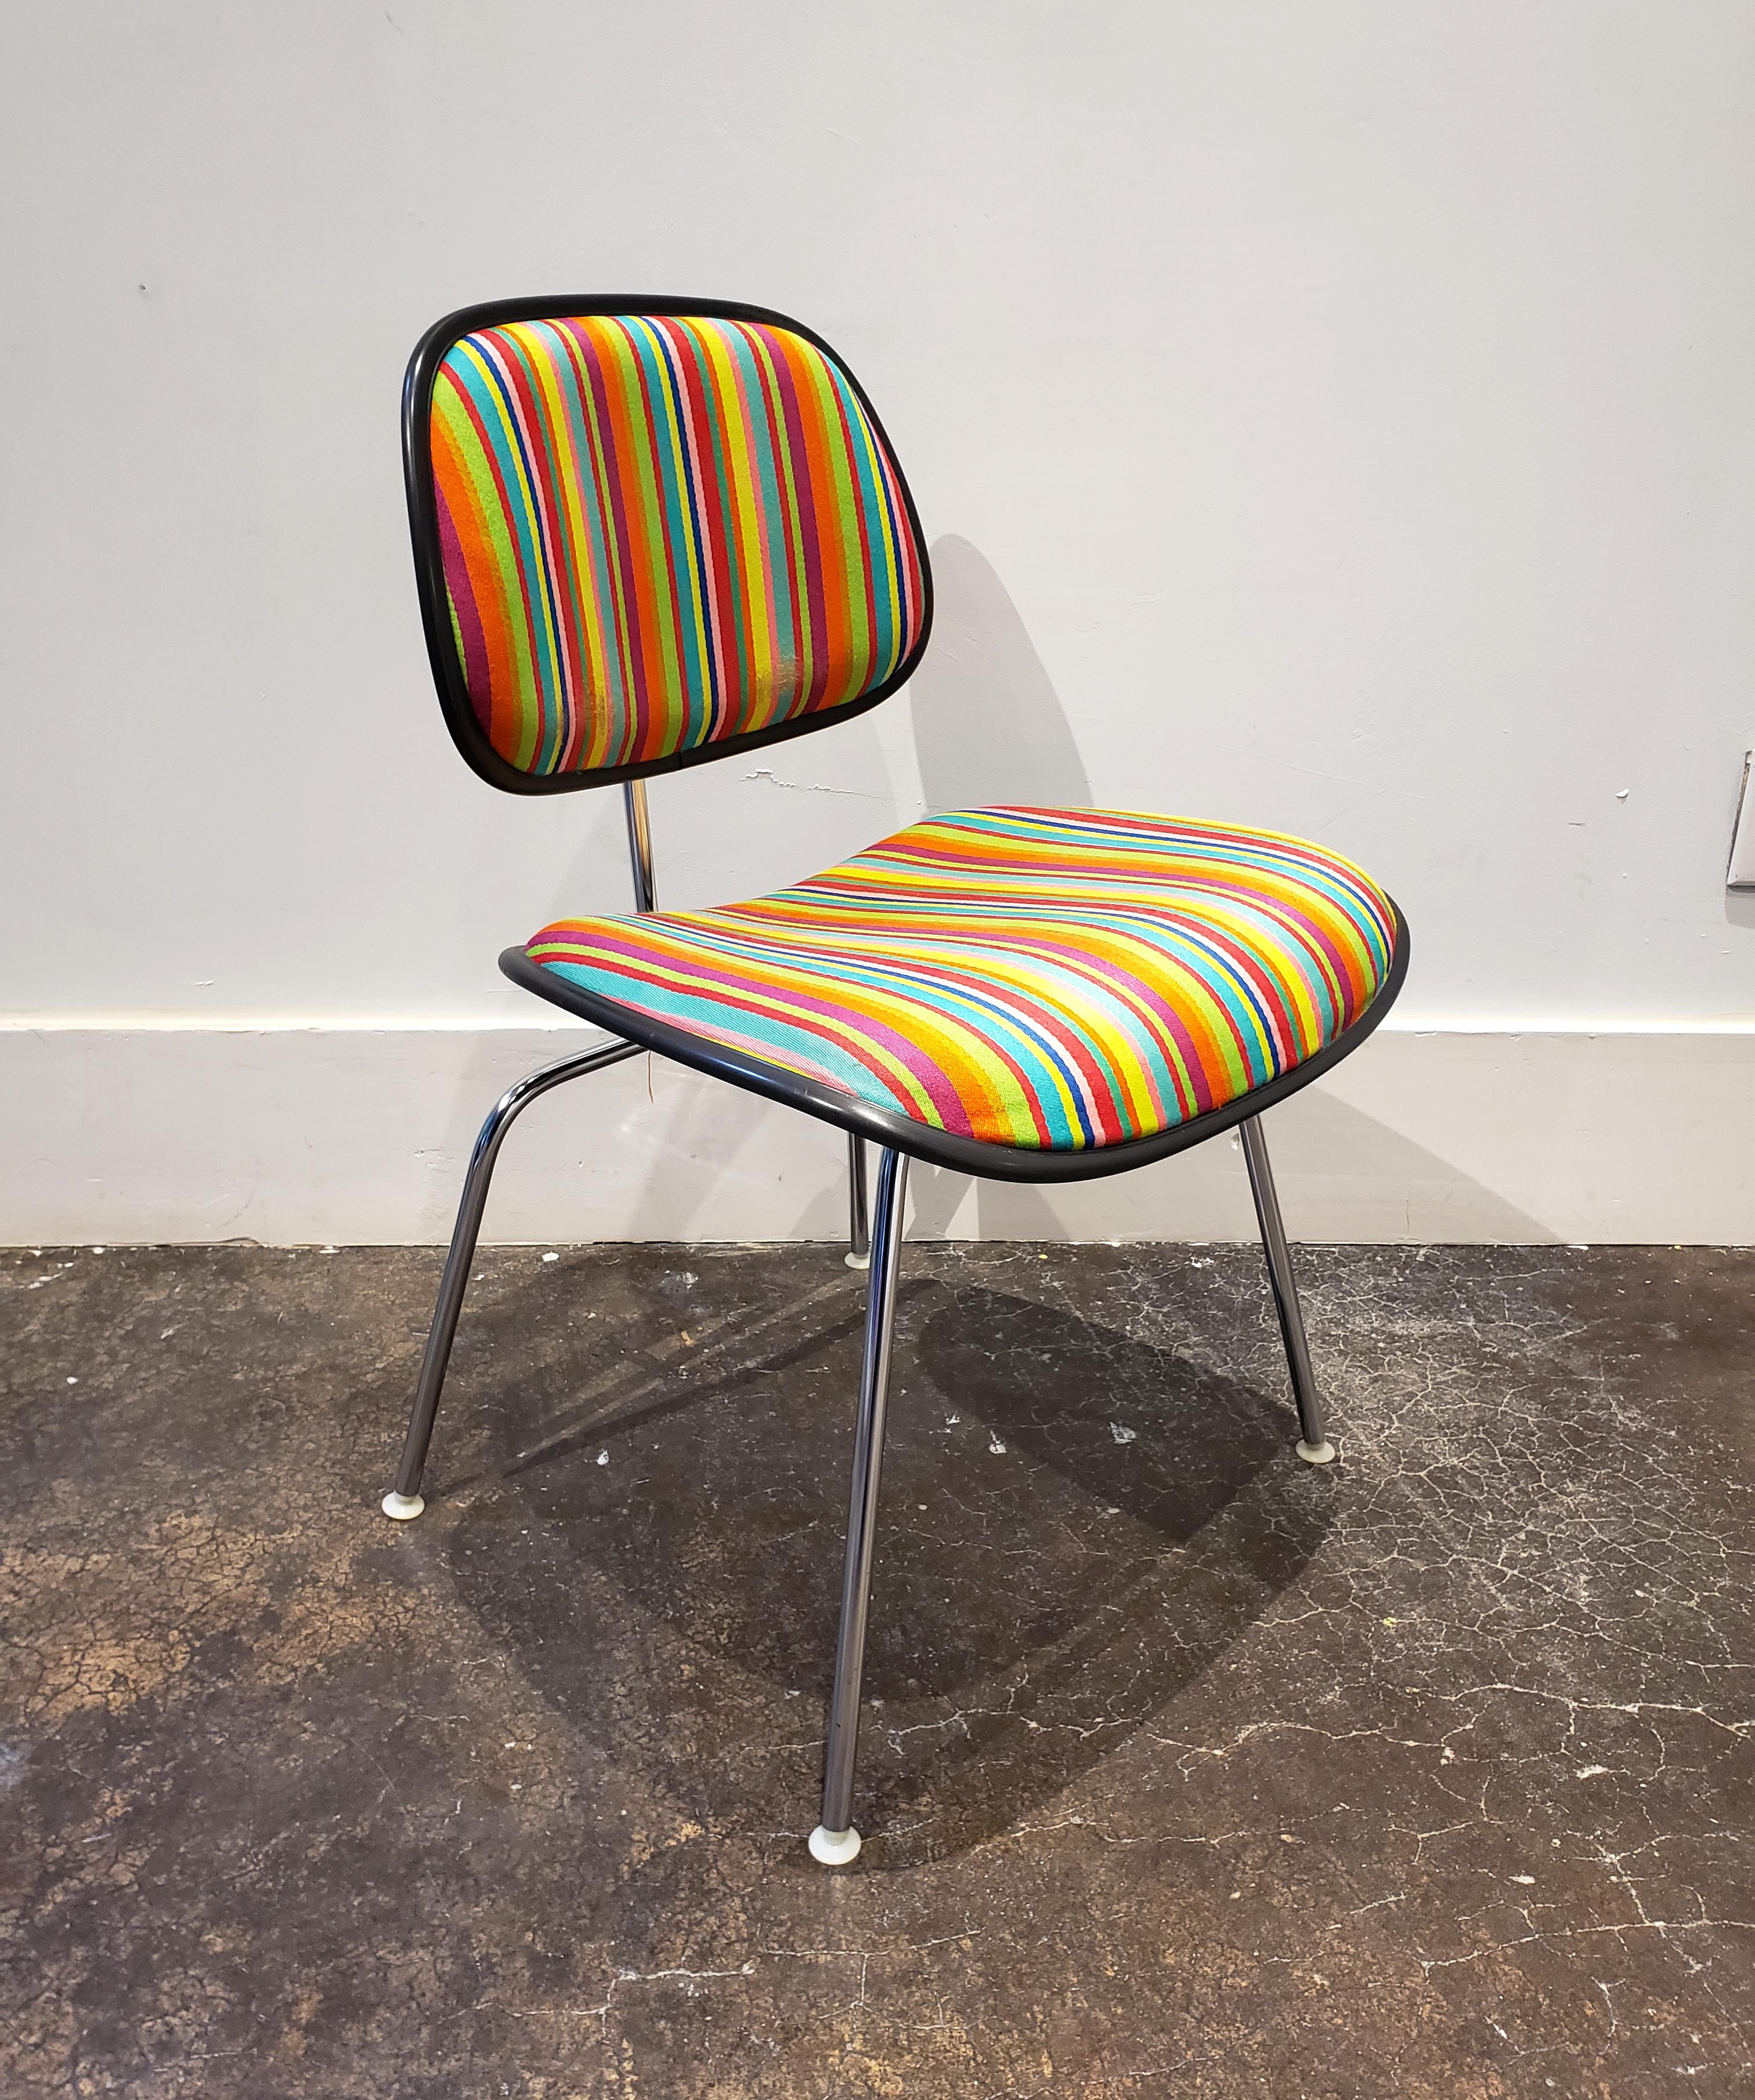 Eames EC127 padded DCM chair with rare Alexander Girard designed fabric. Manufactured circa 1990 by Herman Miller Furniture in Michigan. Good vintage condition, light wear to fabric on backrest (see pictures).